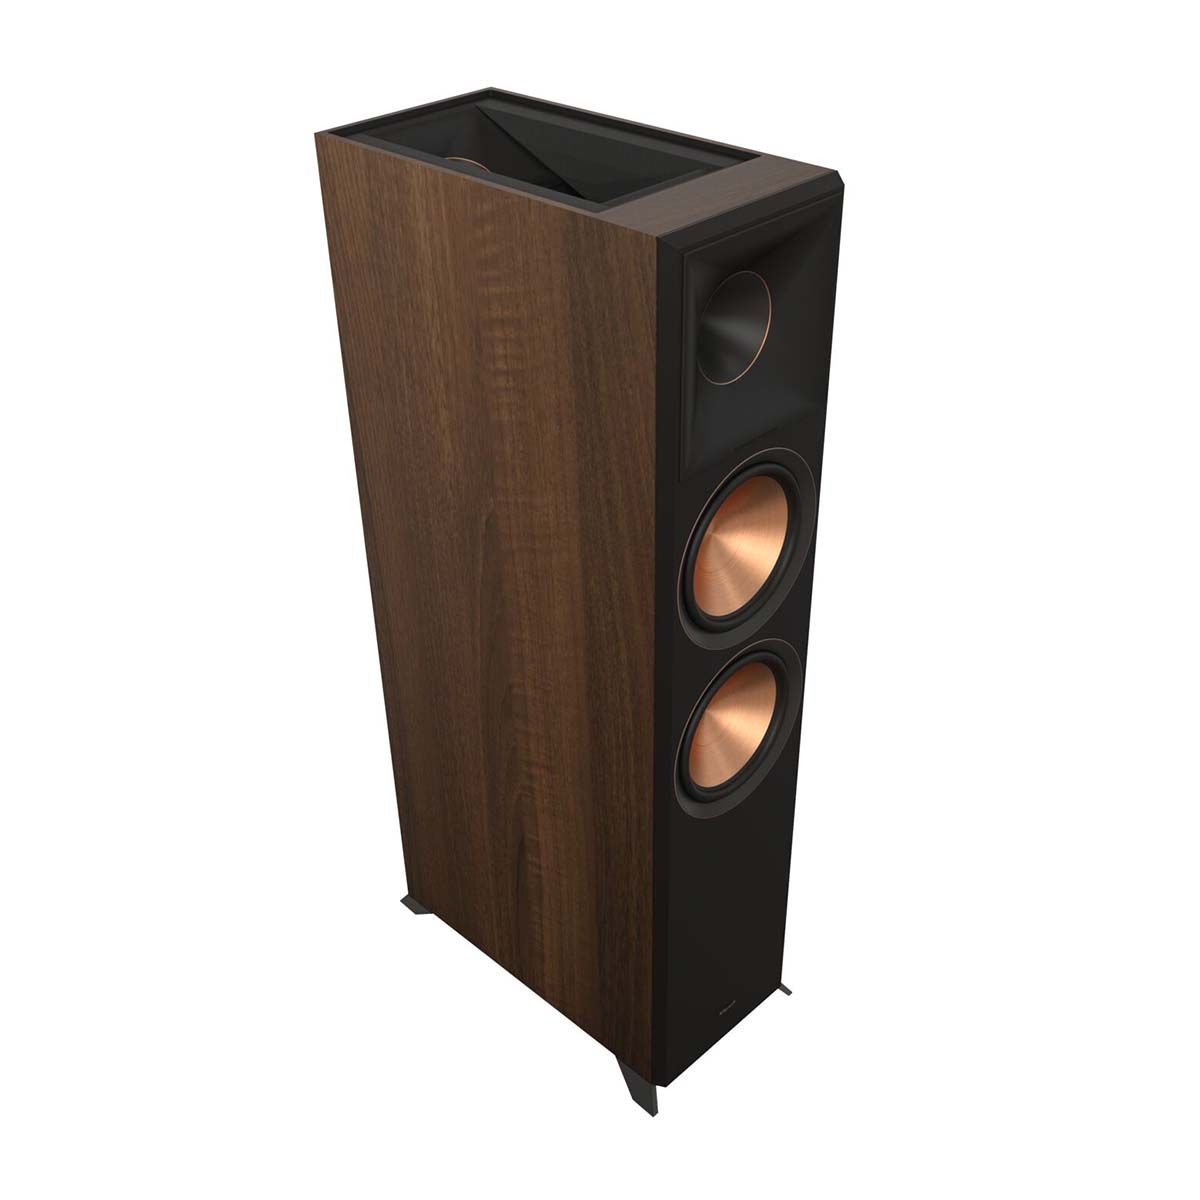 Klipsch RP-8060FA II Dolby Atmos Floorstanding Speaker - Walnut - angled front view without grill